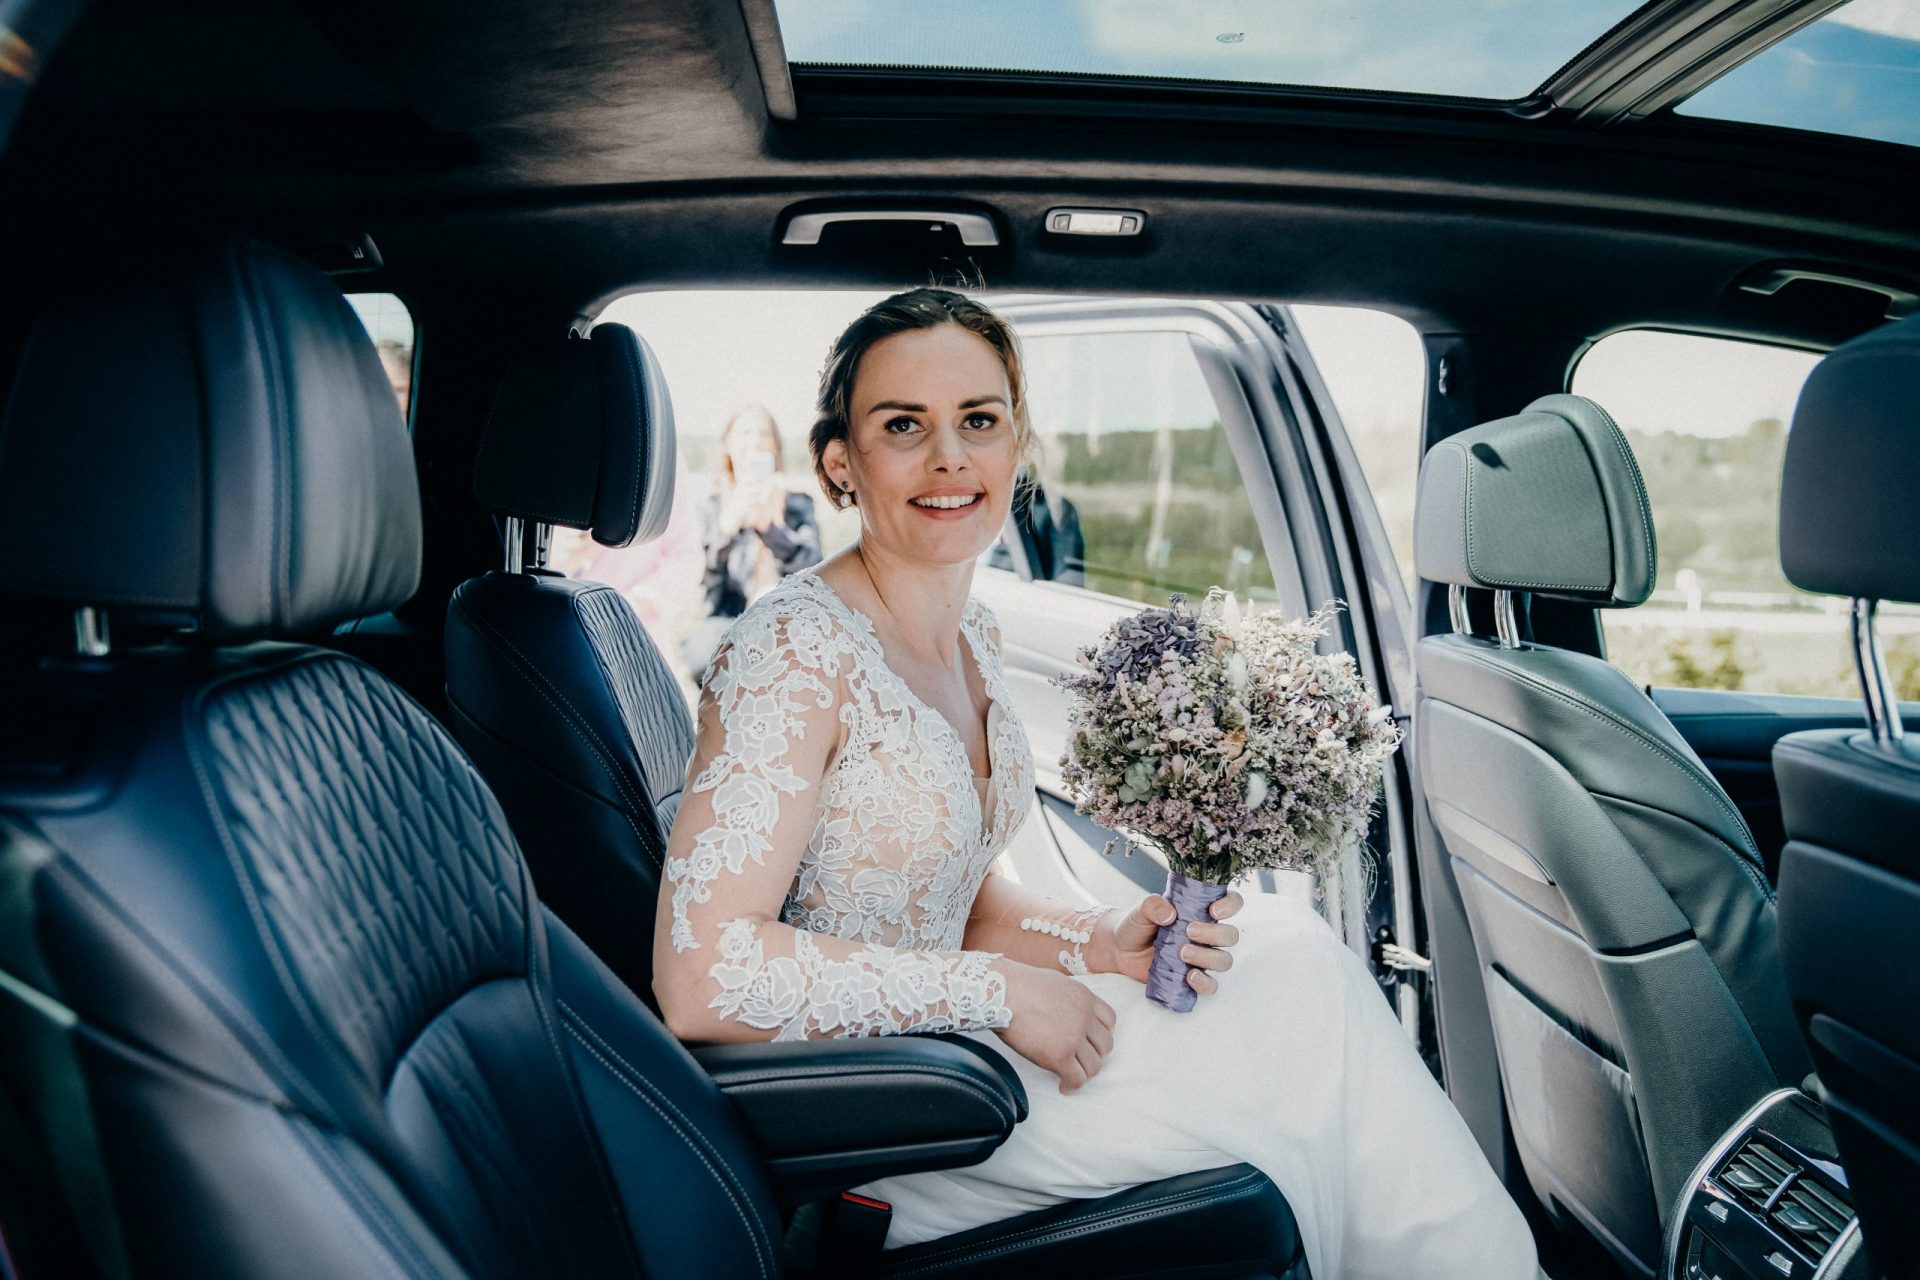 Wedding Transportation Services: A Checklist for Brides and Grooms